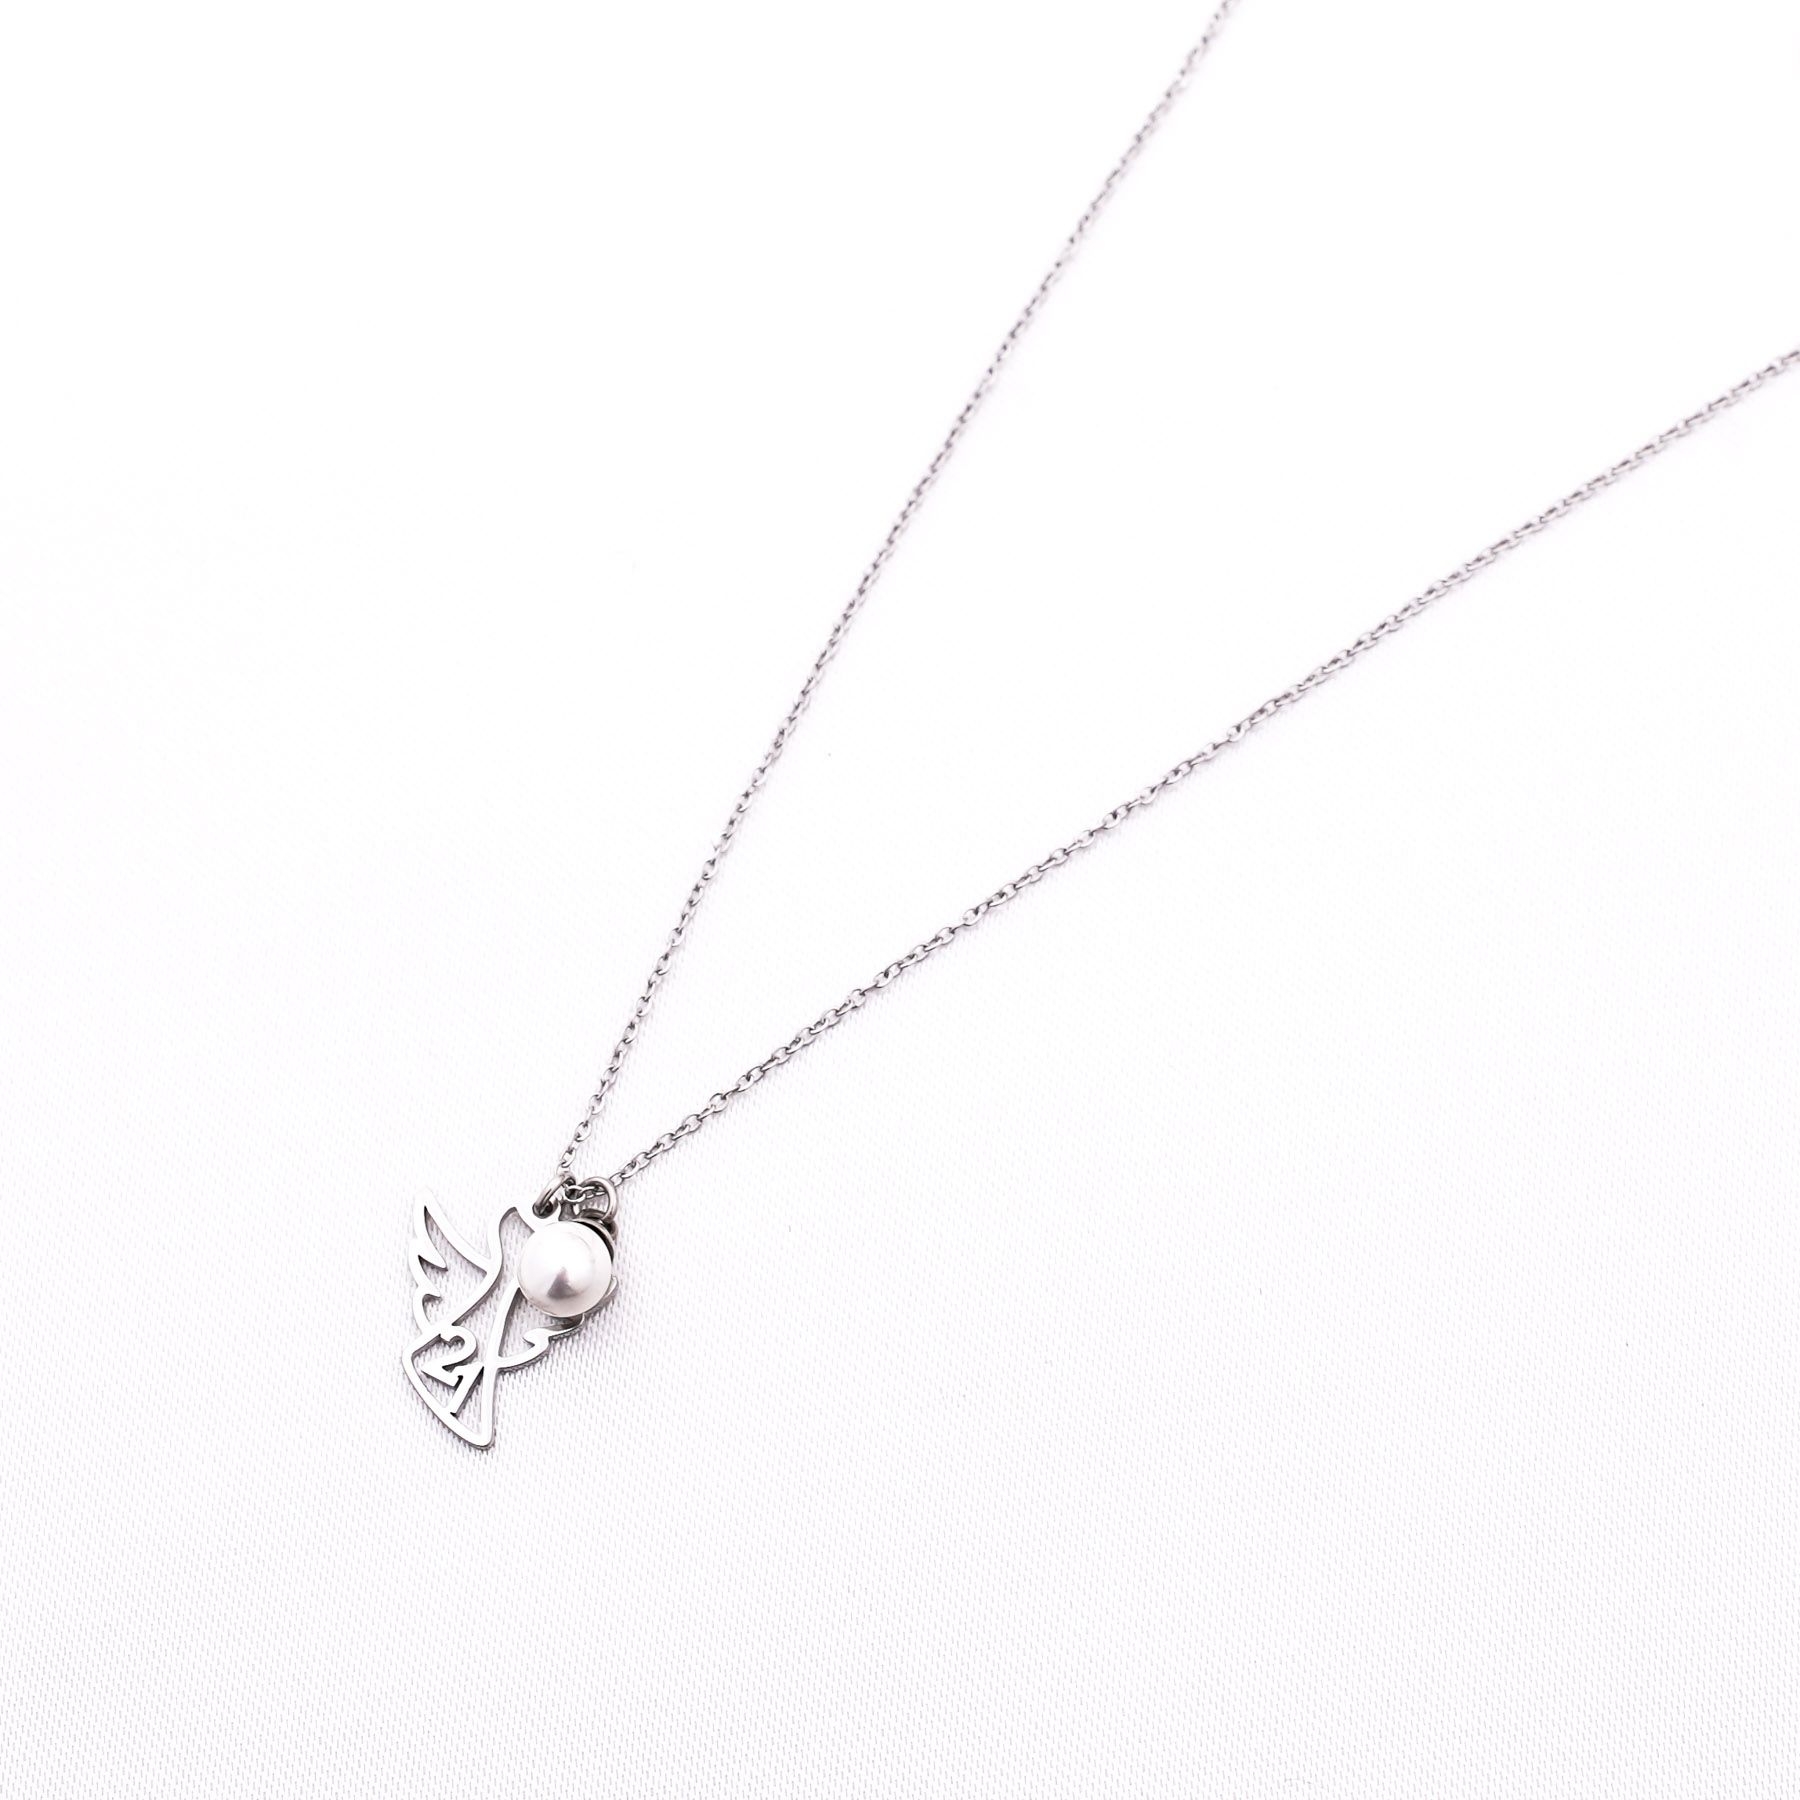 LUCKY DAY NECKLACE - SILVER ' - ' ΜΕΝΤΑΓΙΟΝ